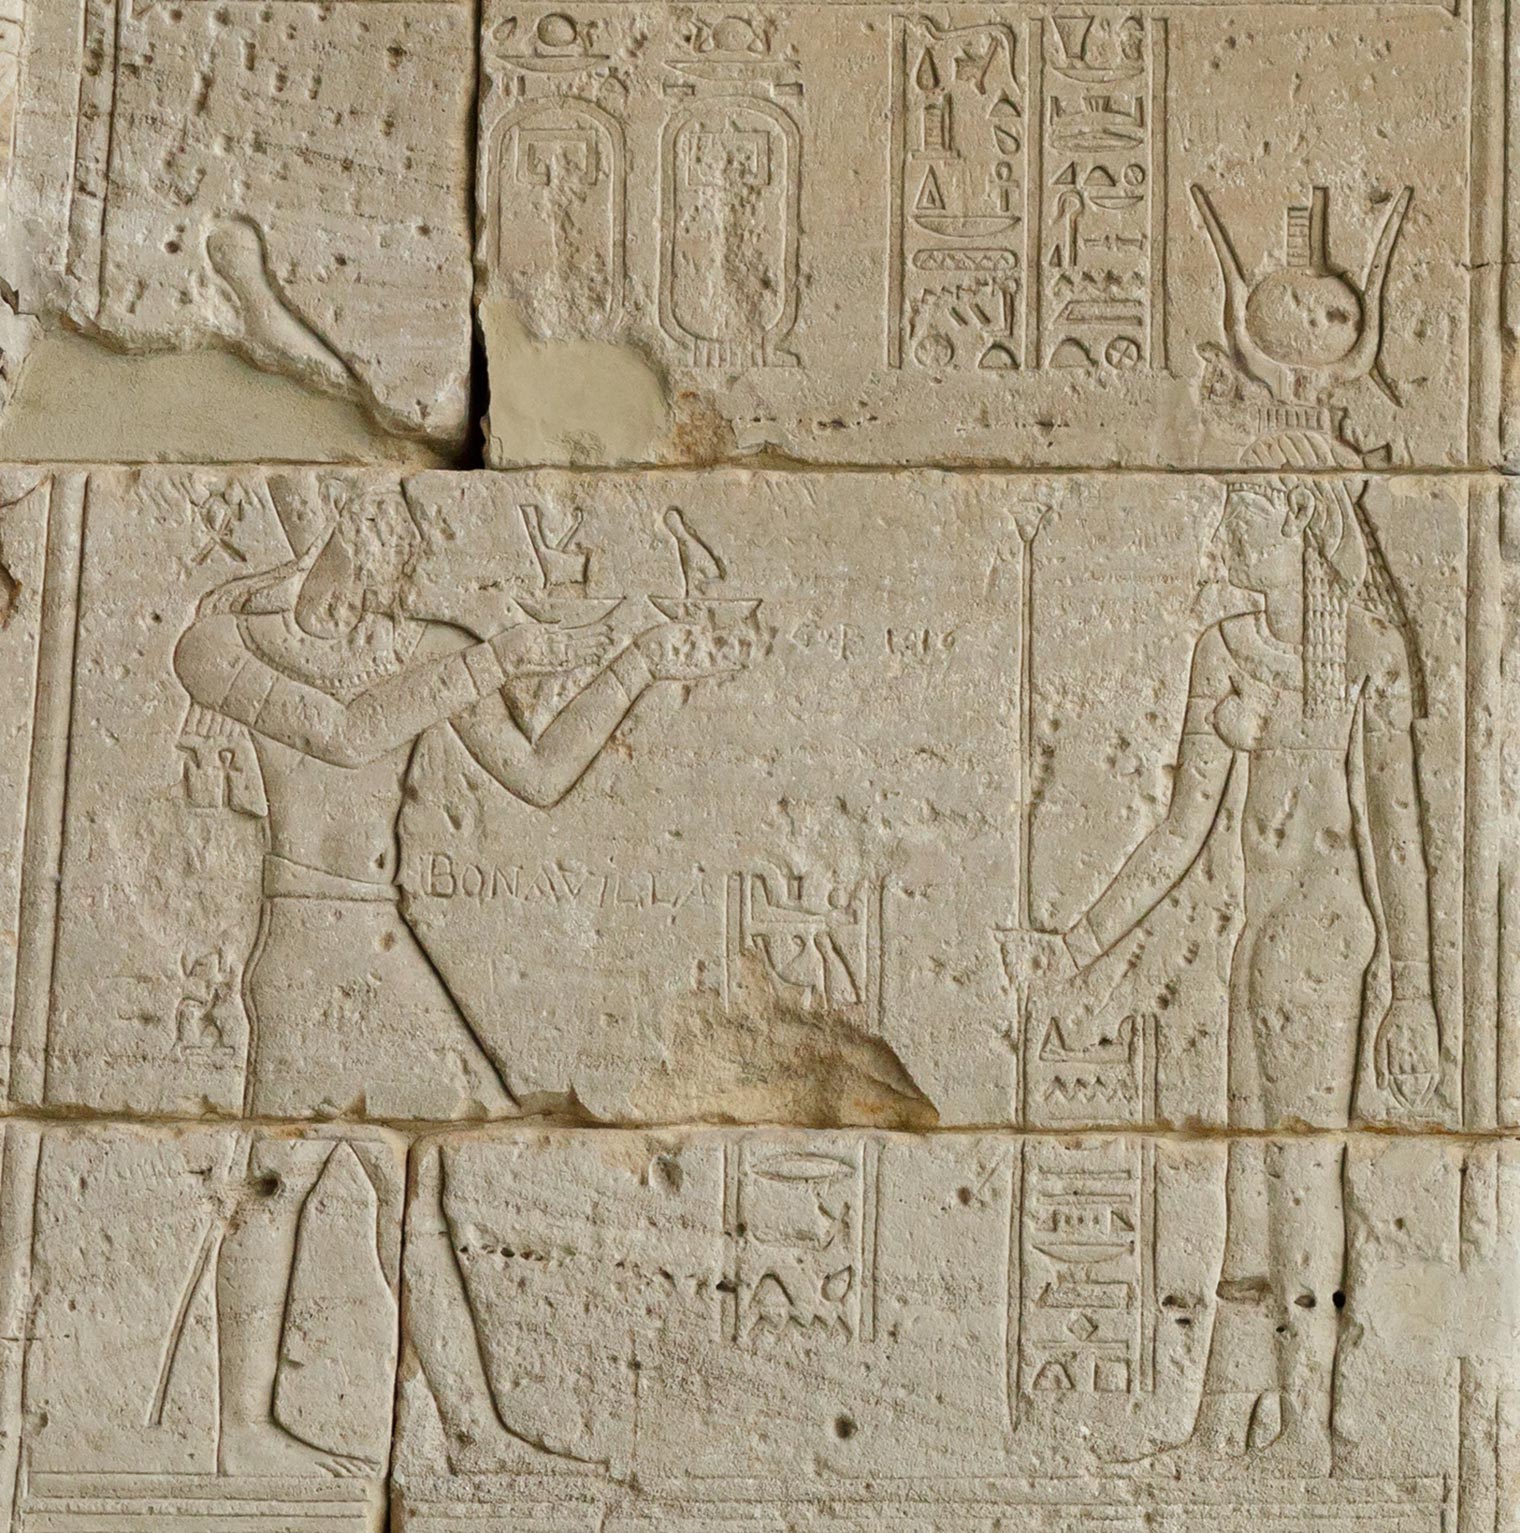 Detail depicting Augustus (left) offering the crowns of Upper and Lower Egypt to the goddess Isis (right). On top of her headdress is a small stepped hieroglyph that depicts a throne and was used to write Isis's name.